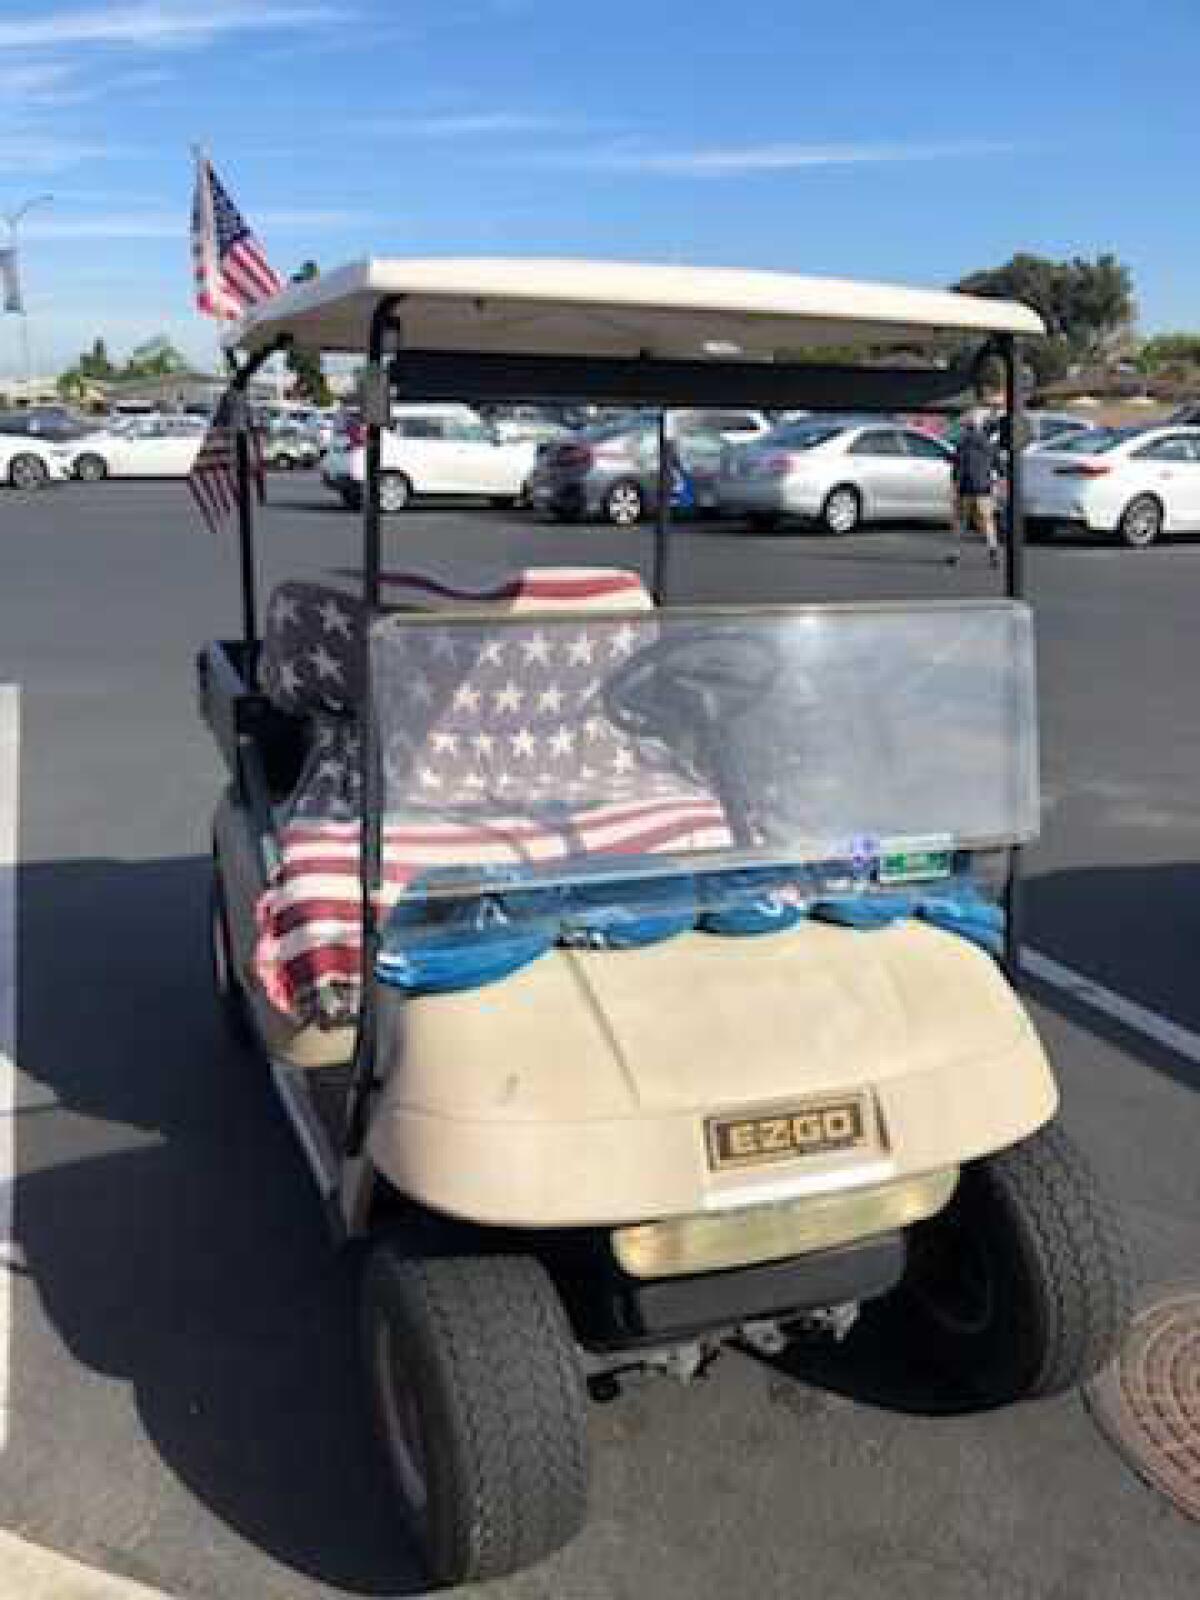 A golf cart with a Stars and Stripes-themed covering at Leisure World in Seal Beach.